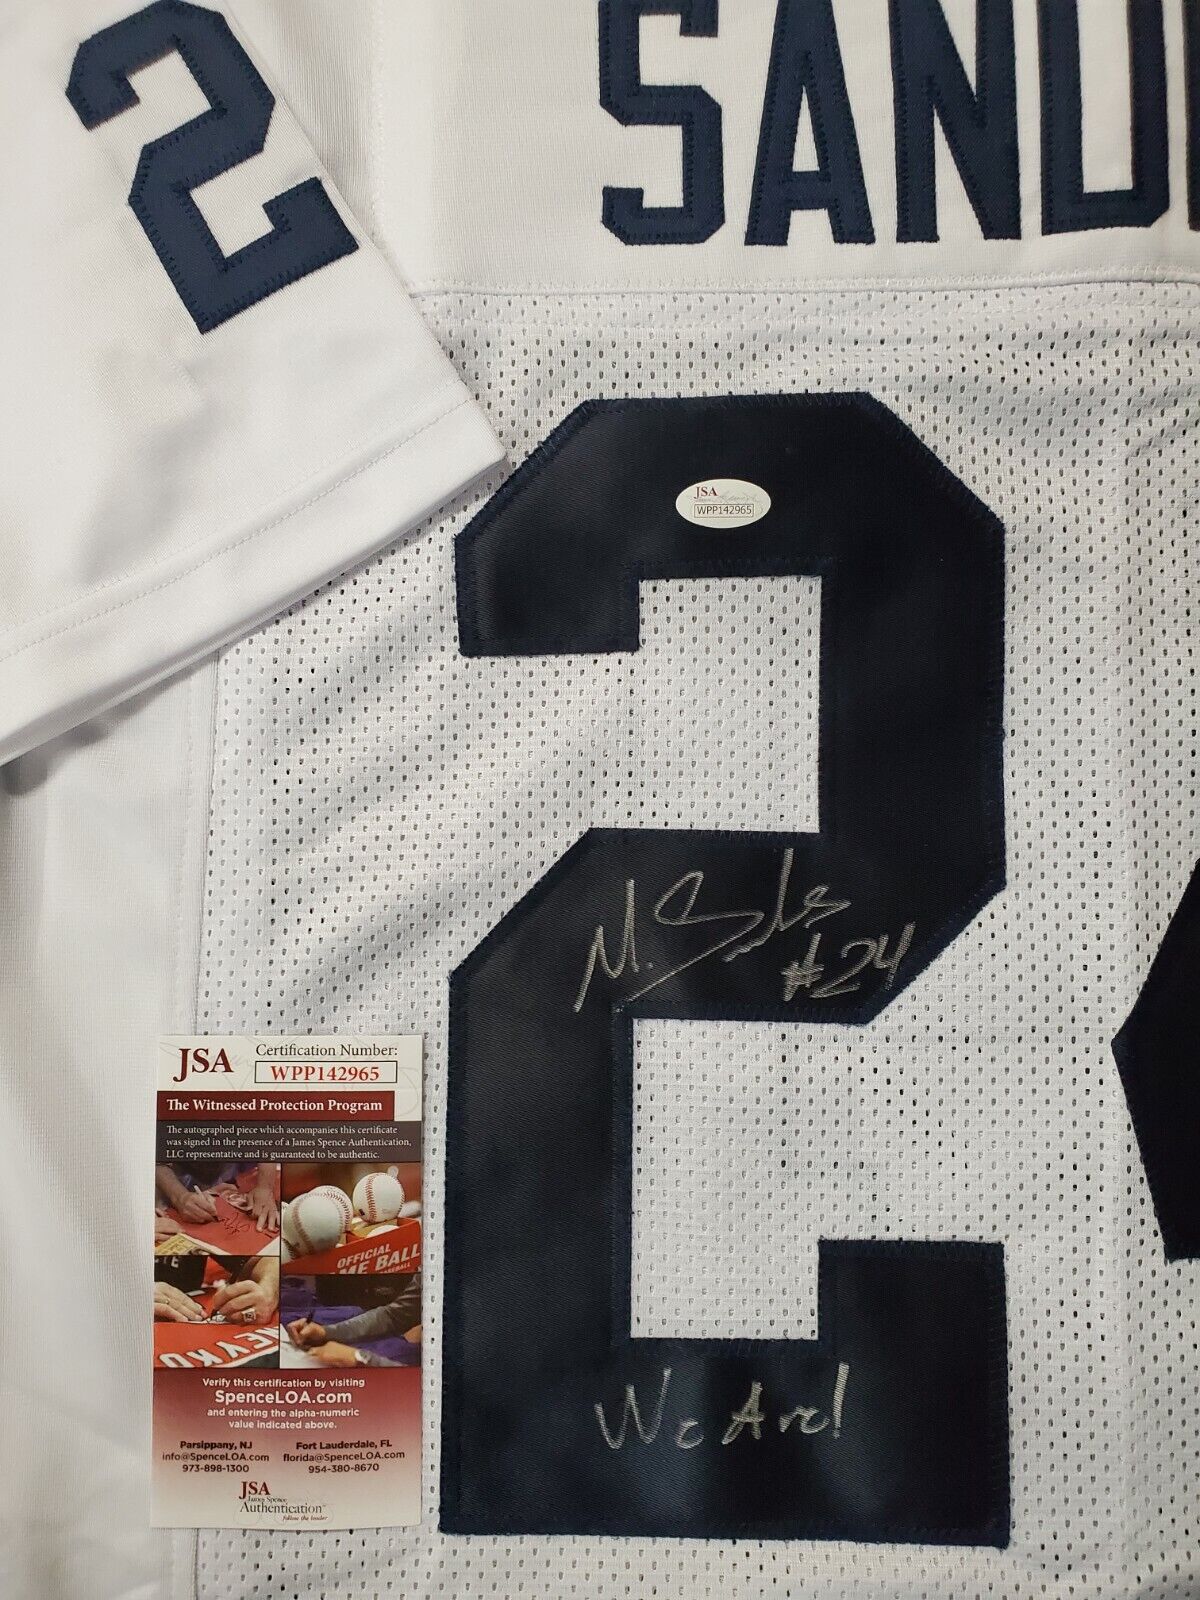 miles sanders stitched jersey